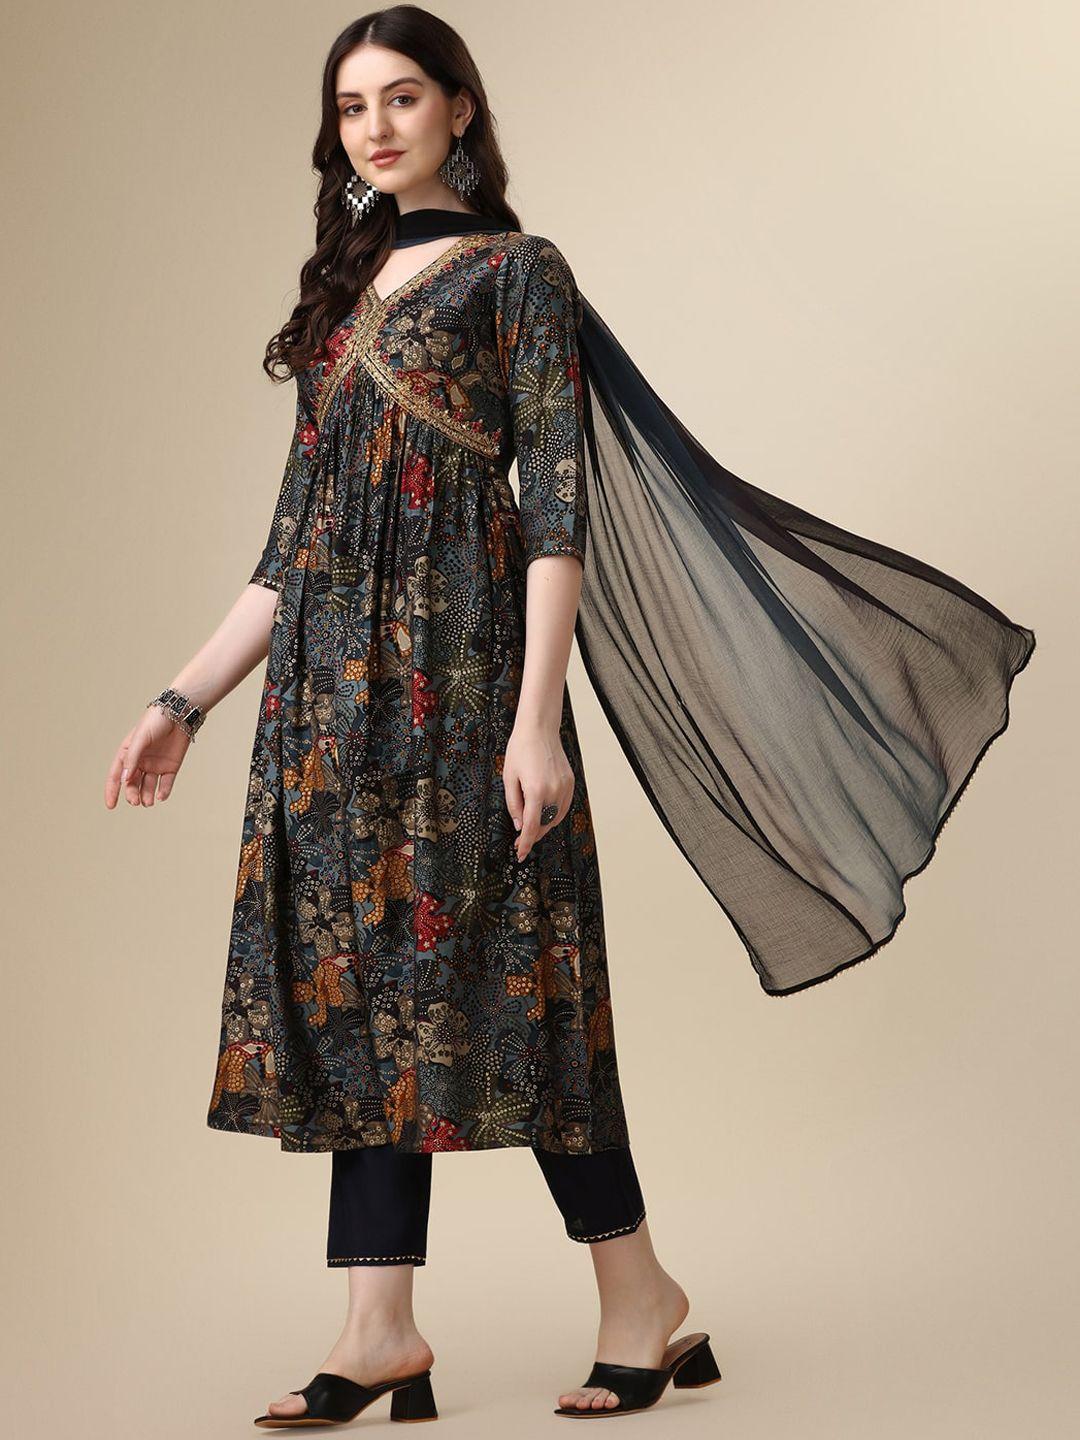 berrylicious floral embroidered thread work kurta with trousers & dupatta